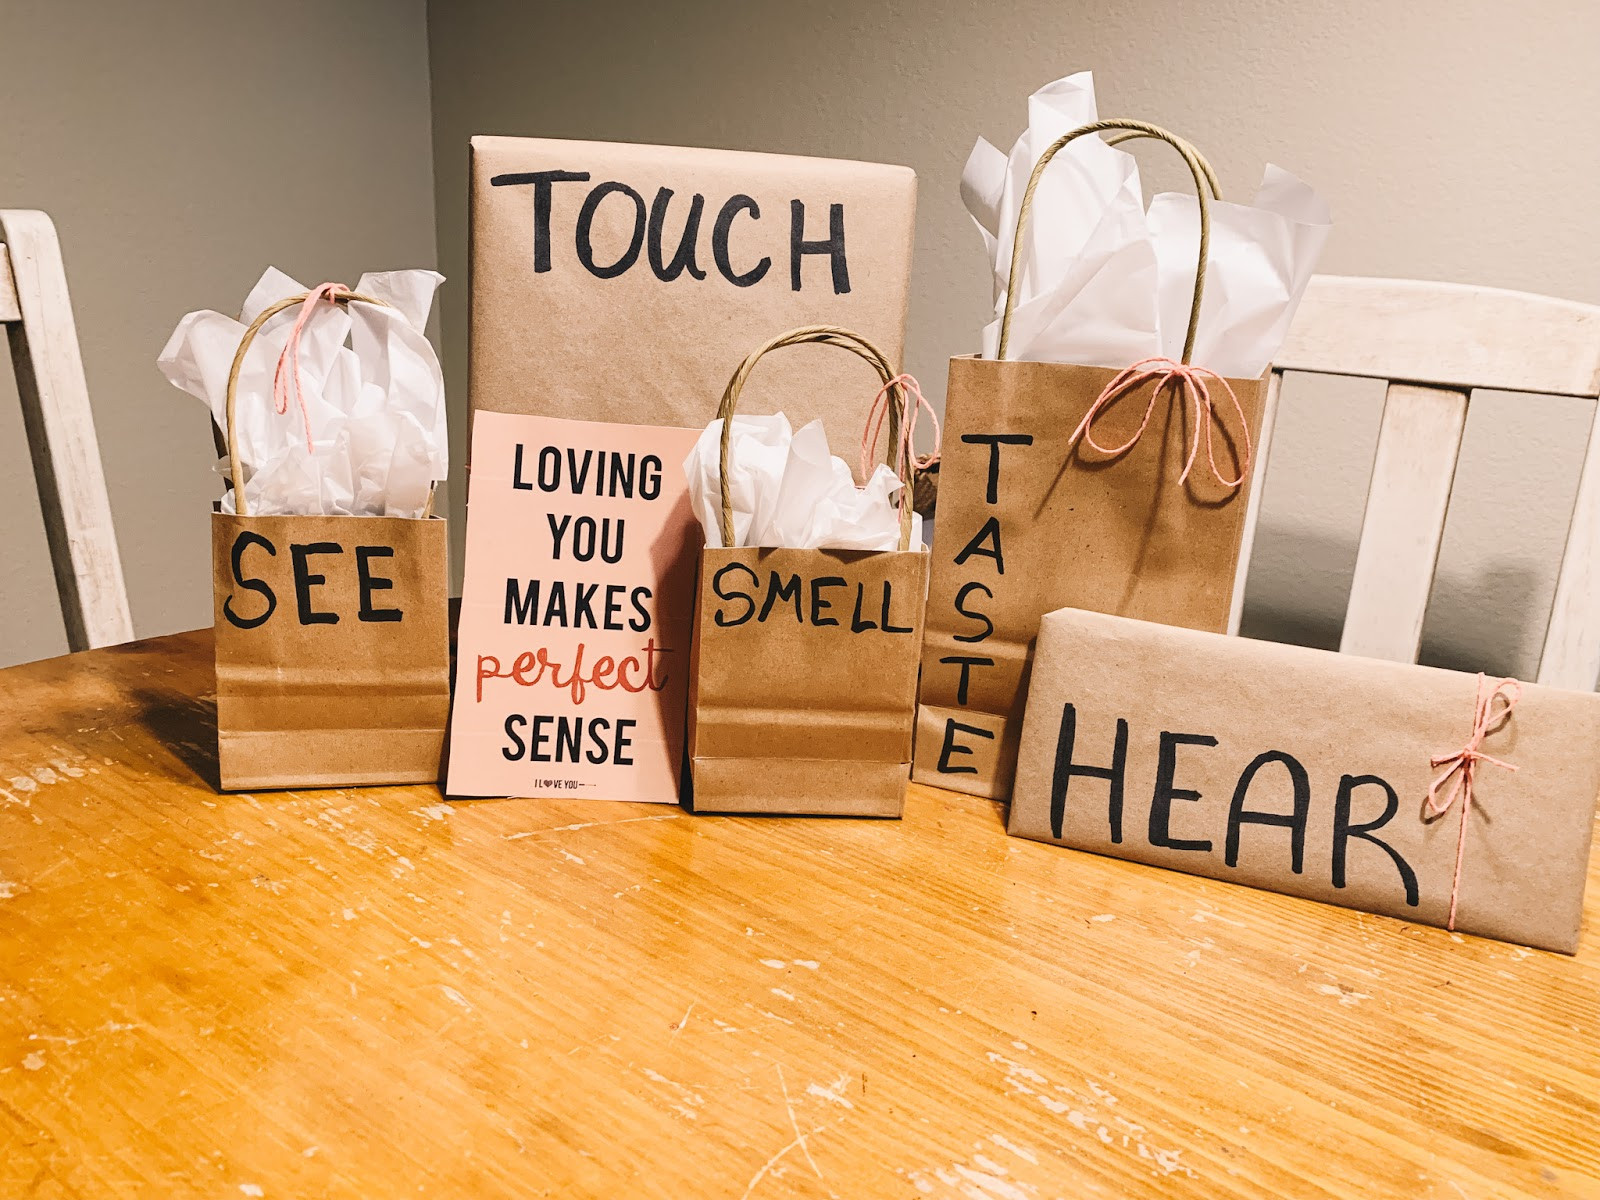 Valentine Day Gift Ideas For Him Diy
 The 5 Senses Valentines Day Gift Ideas for Him & Her